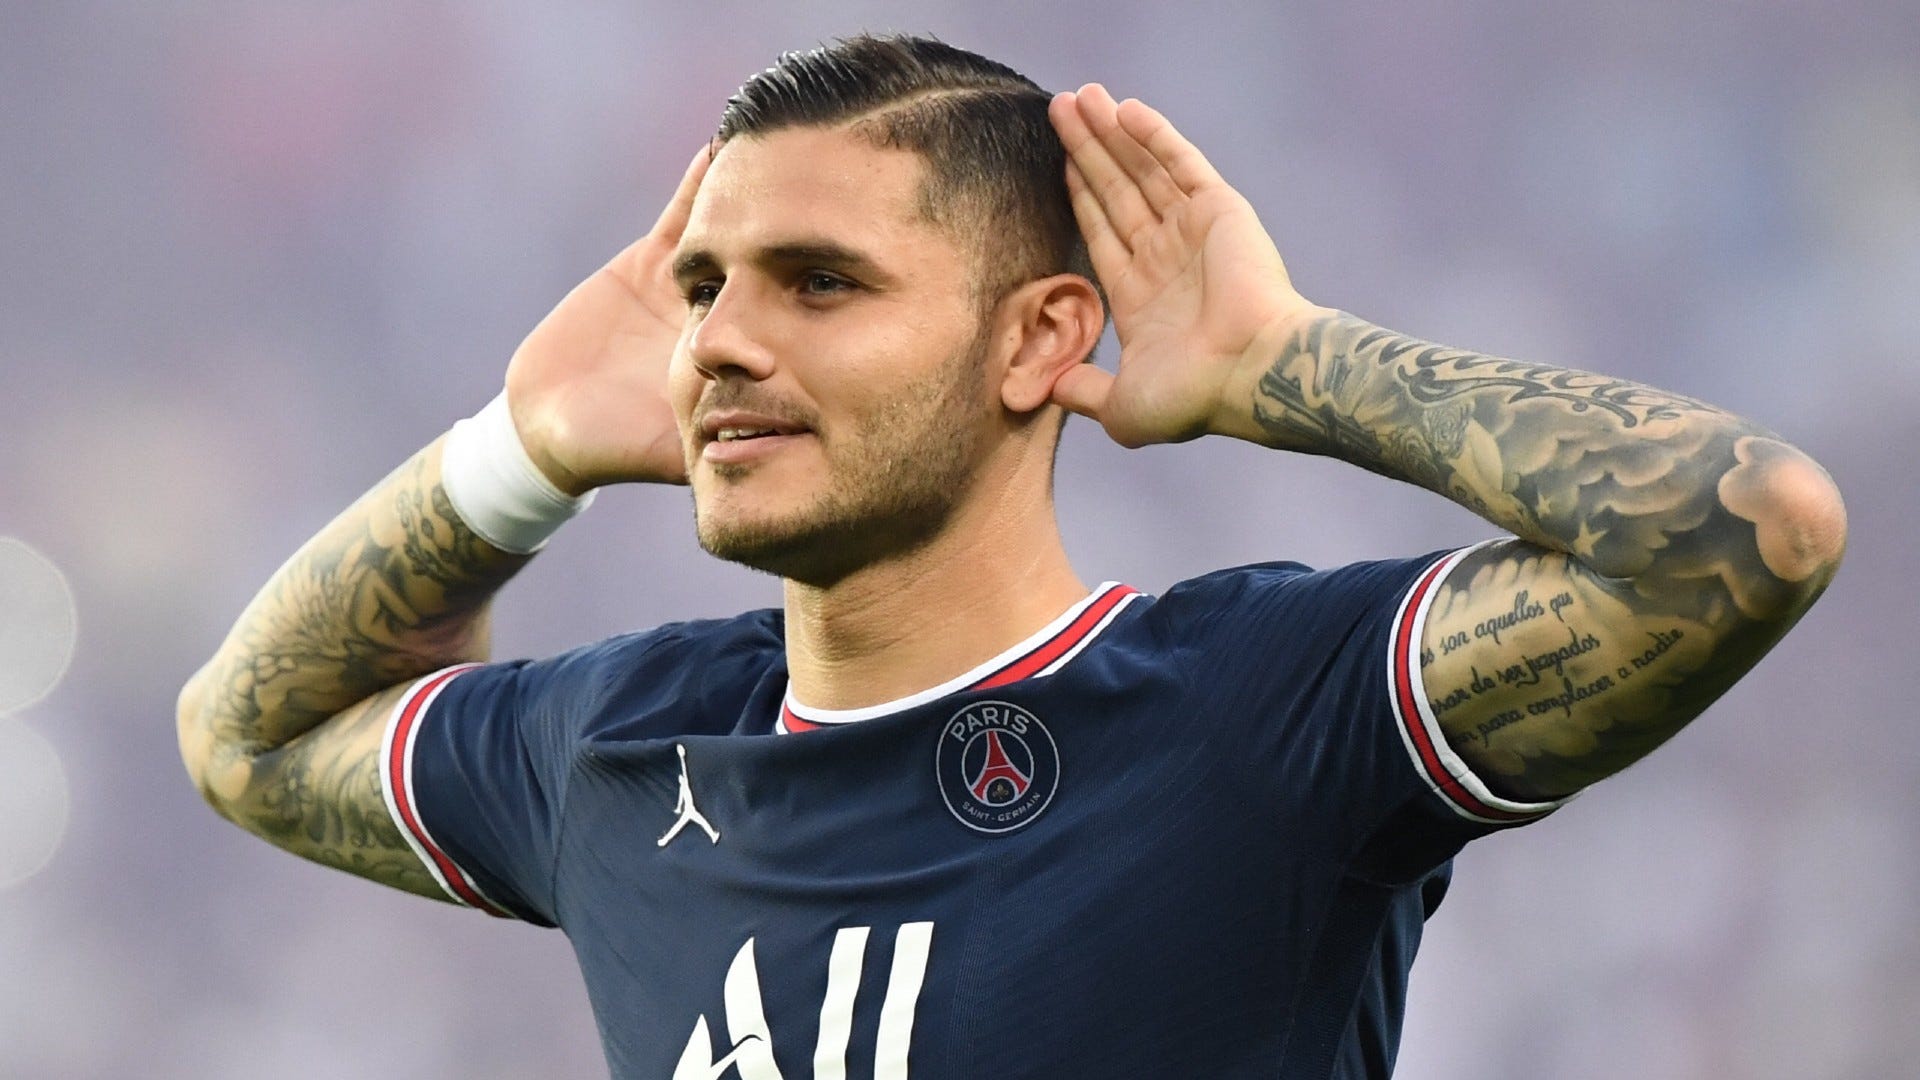 These stories are a load of cr*p!' - PSG's Icardi issues furious response  to transfer reports | Goal.com US